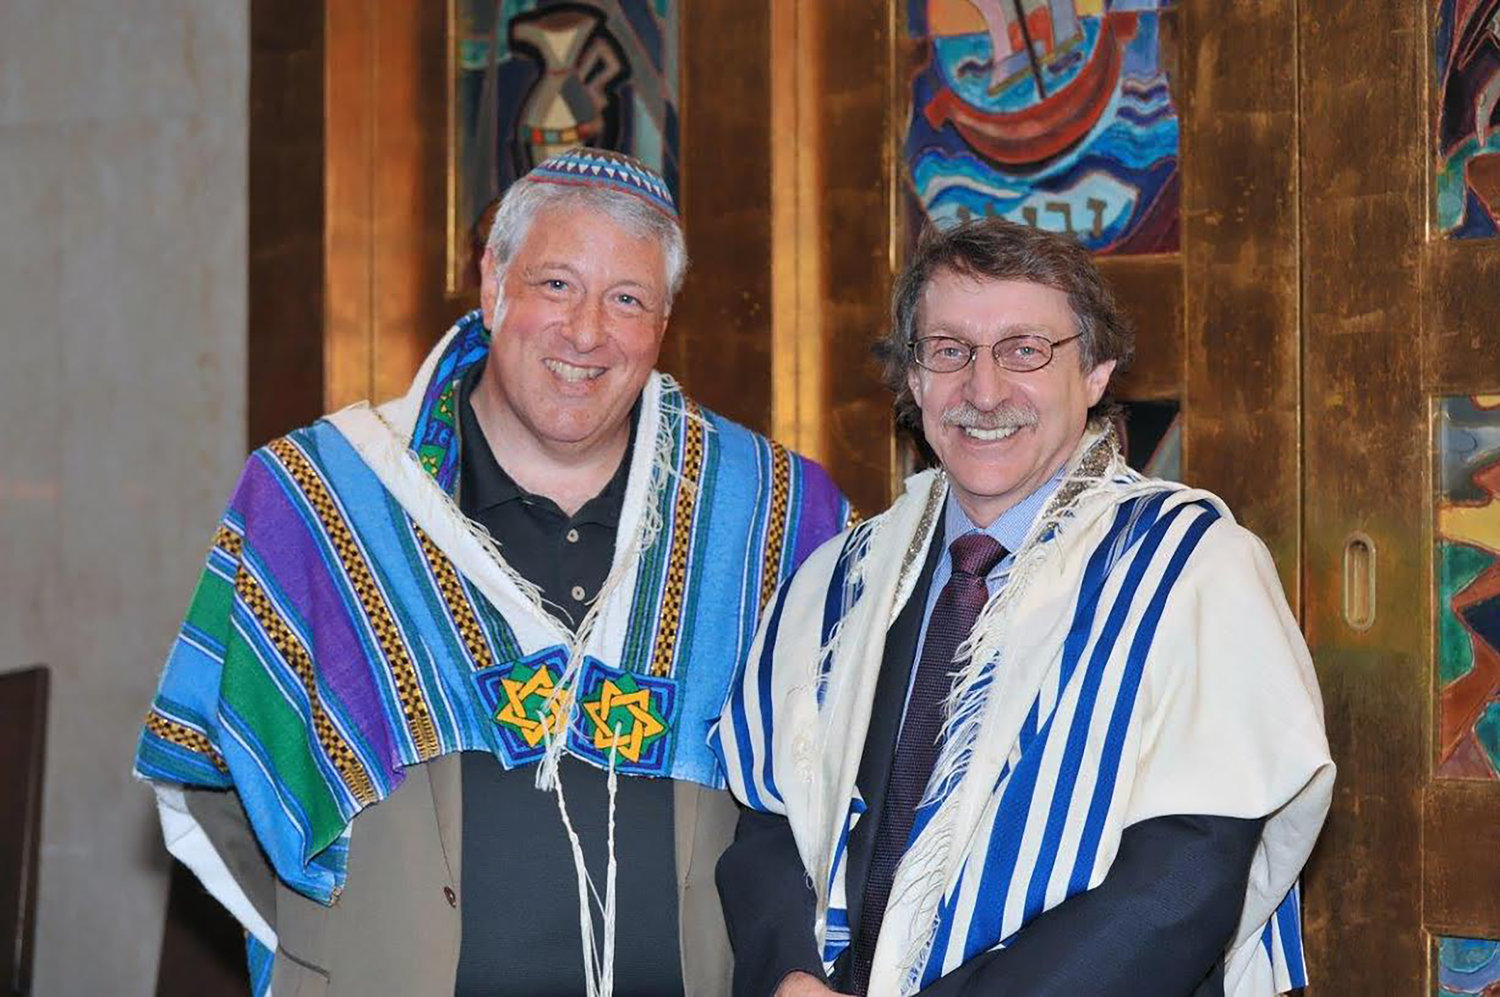 Congregation Tifereth Israel will be celebrating its 125th anniversary this year. Cantor Gustavo Gitlin, left, and Rabbi Irwin Huberman have served the congregation since the early 2000s.